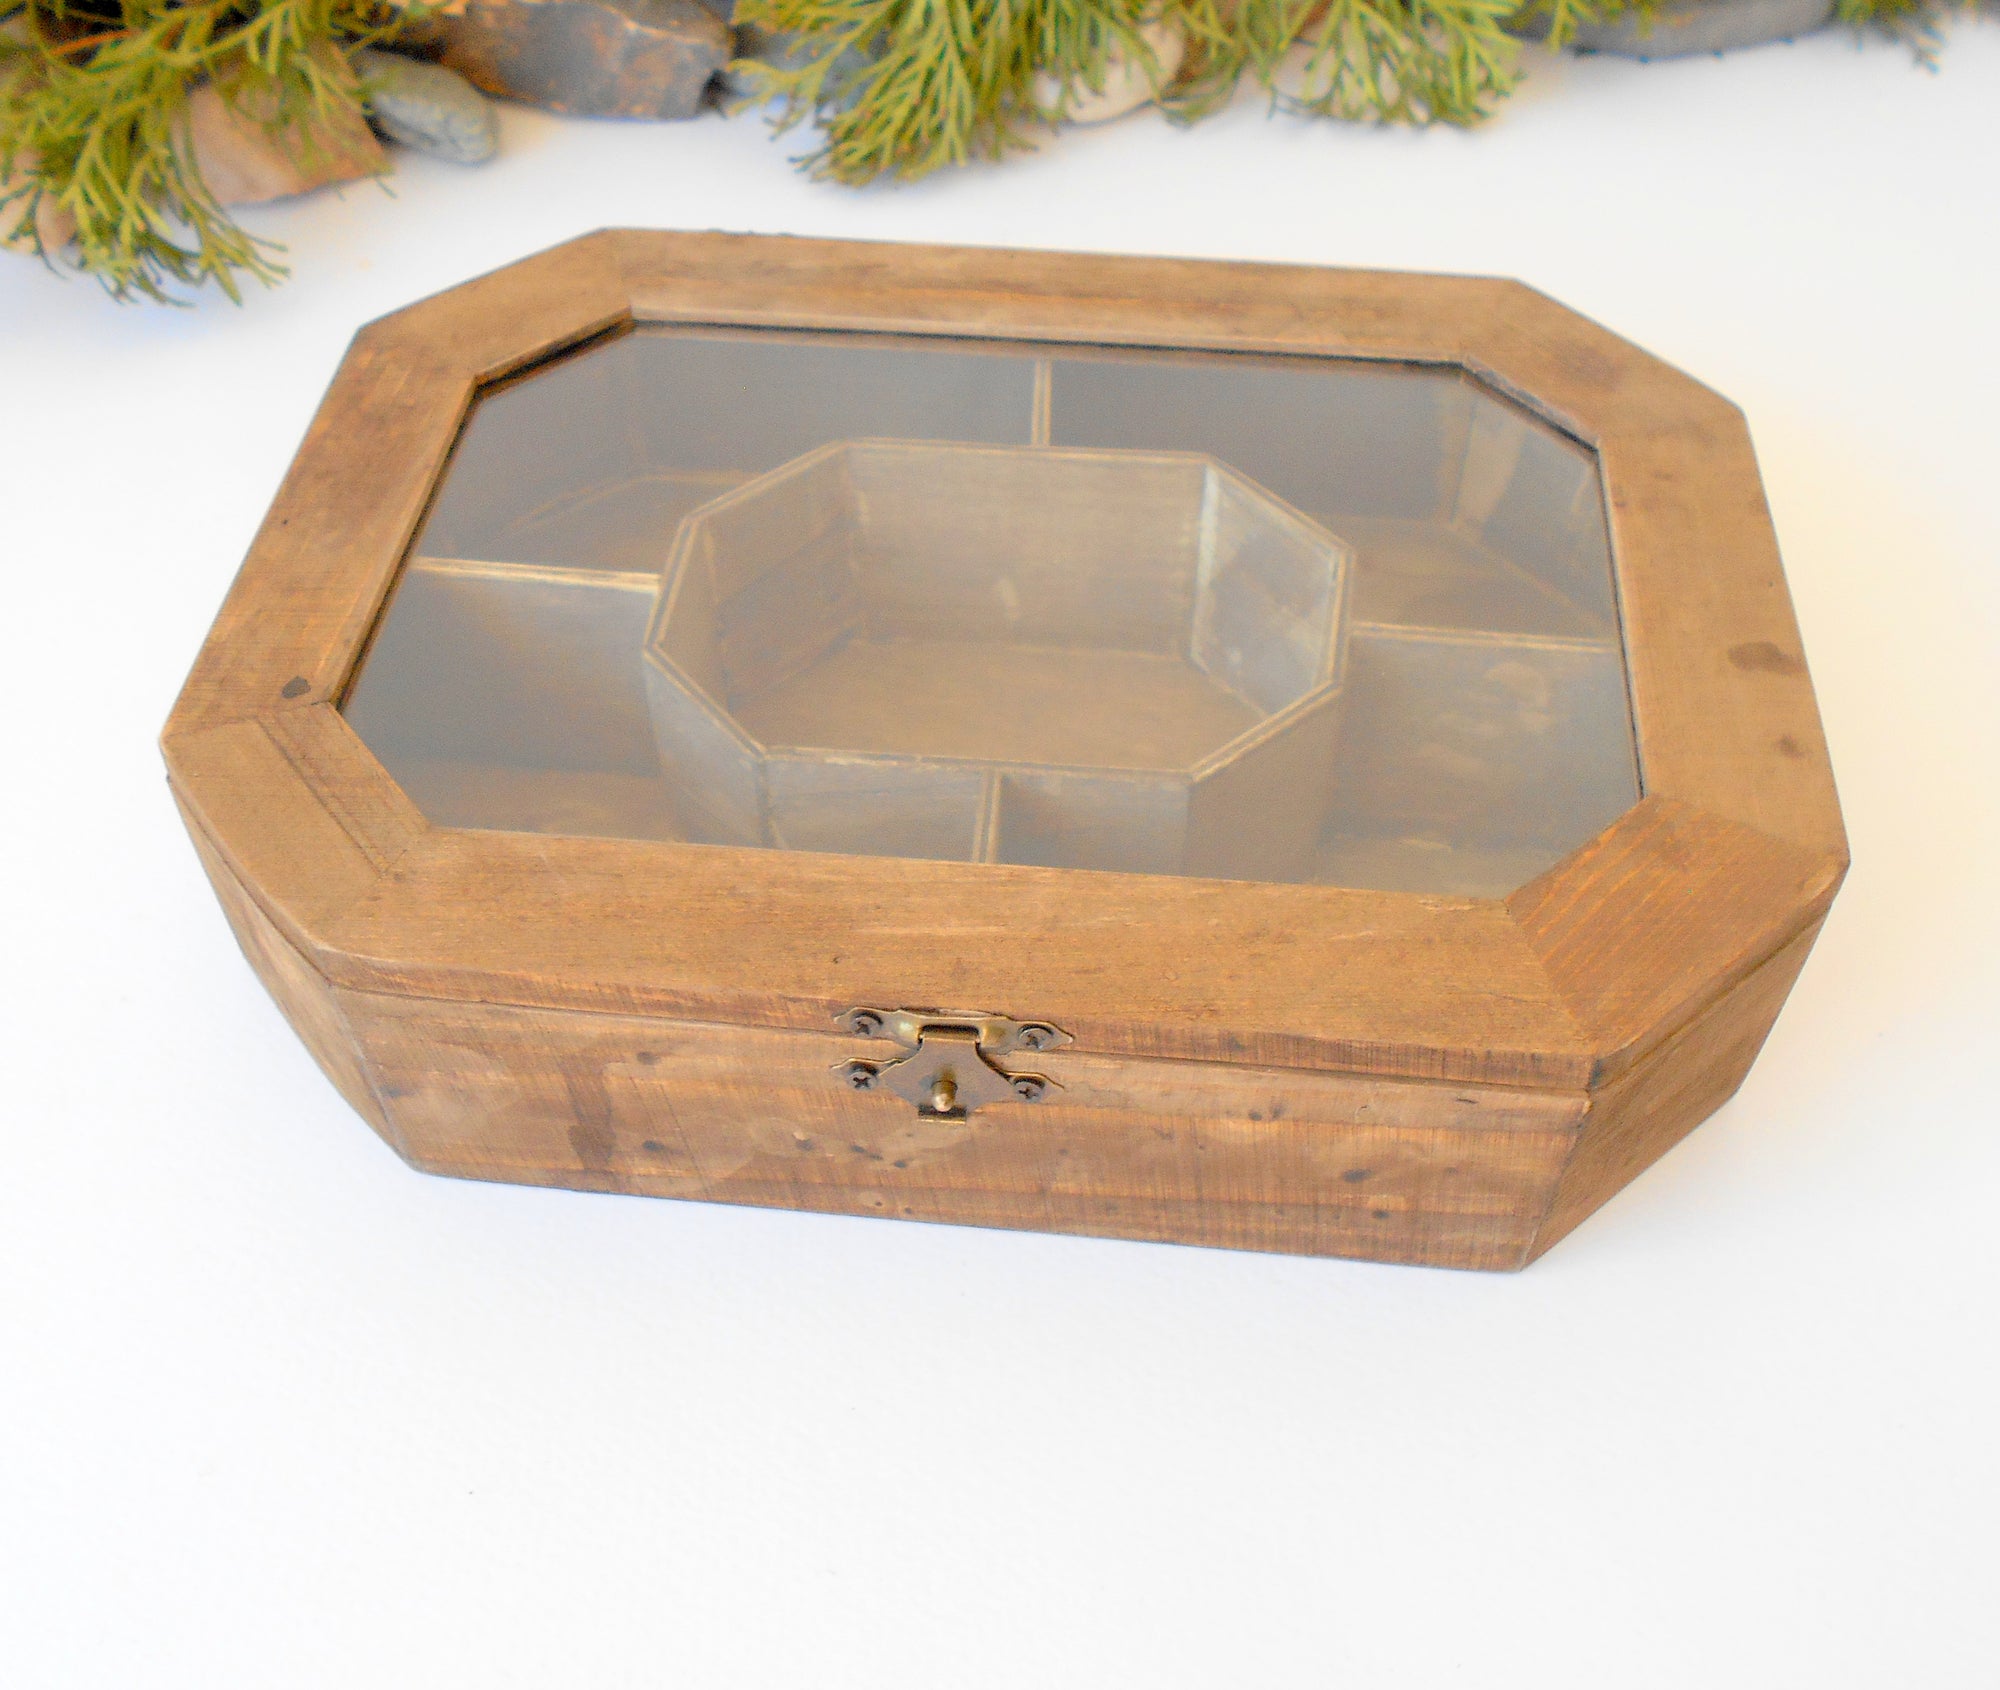 This is a wooden box with a glass display that is made of pinewood and that has metal hinges and closes with a bronze-color closing that may display various things like jewelry, miniatures, crystals, or other small objects of importance to you or your friends. <span data-mce-fragment="1">I have colored the box with mordant so that it looks like an old wood vintage box with a mahogany color.</span>